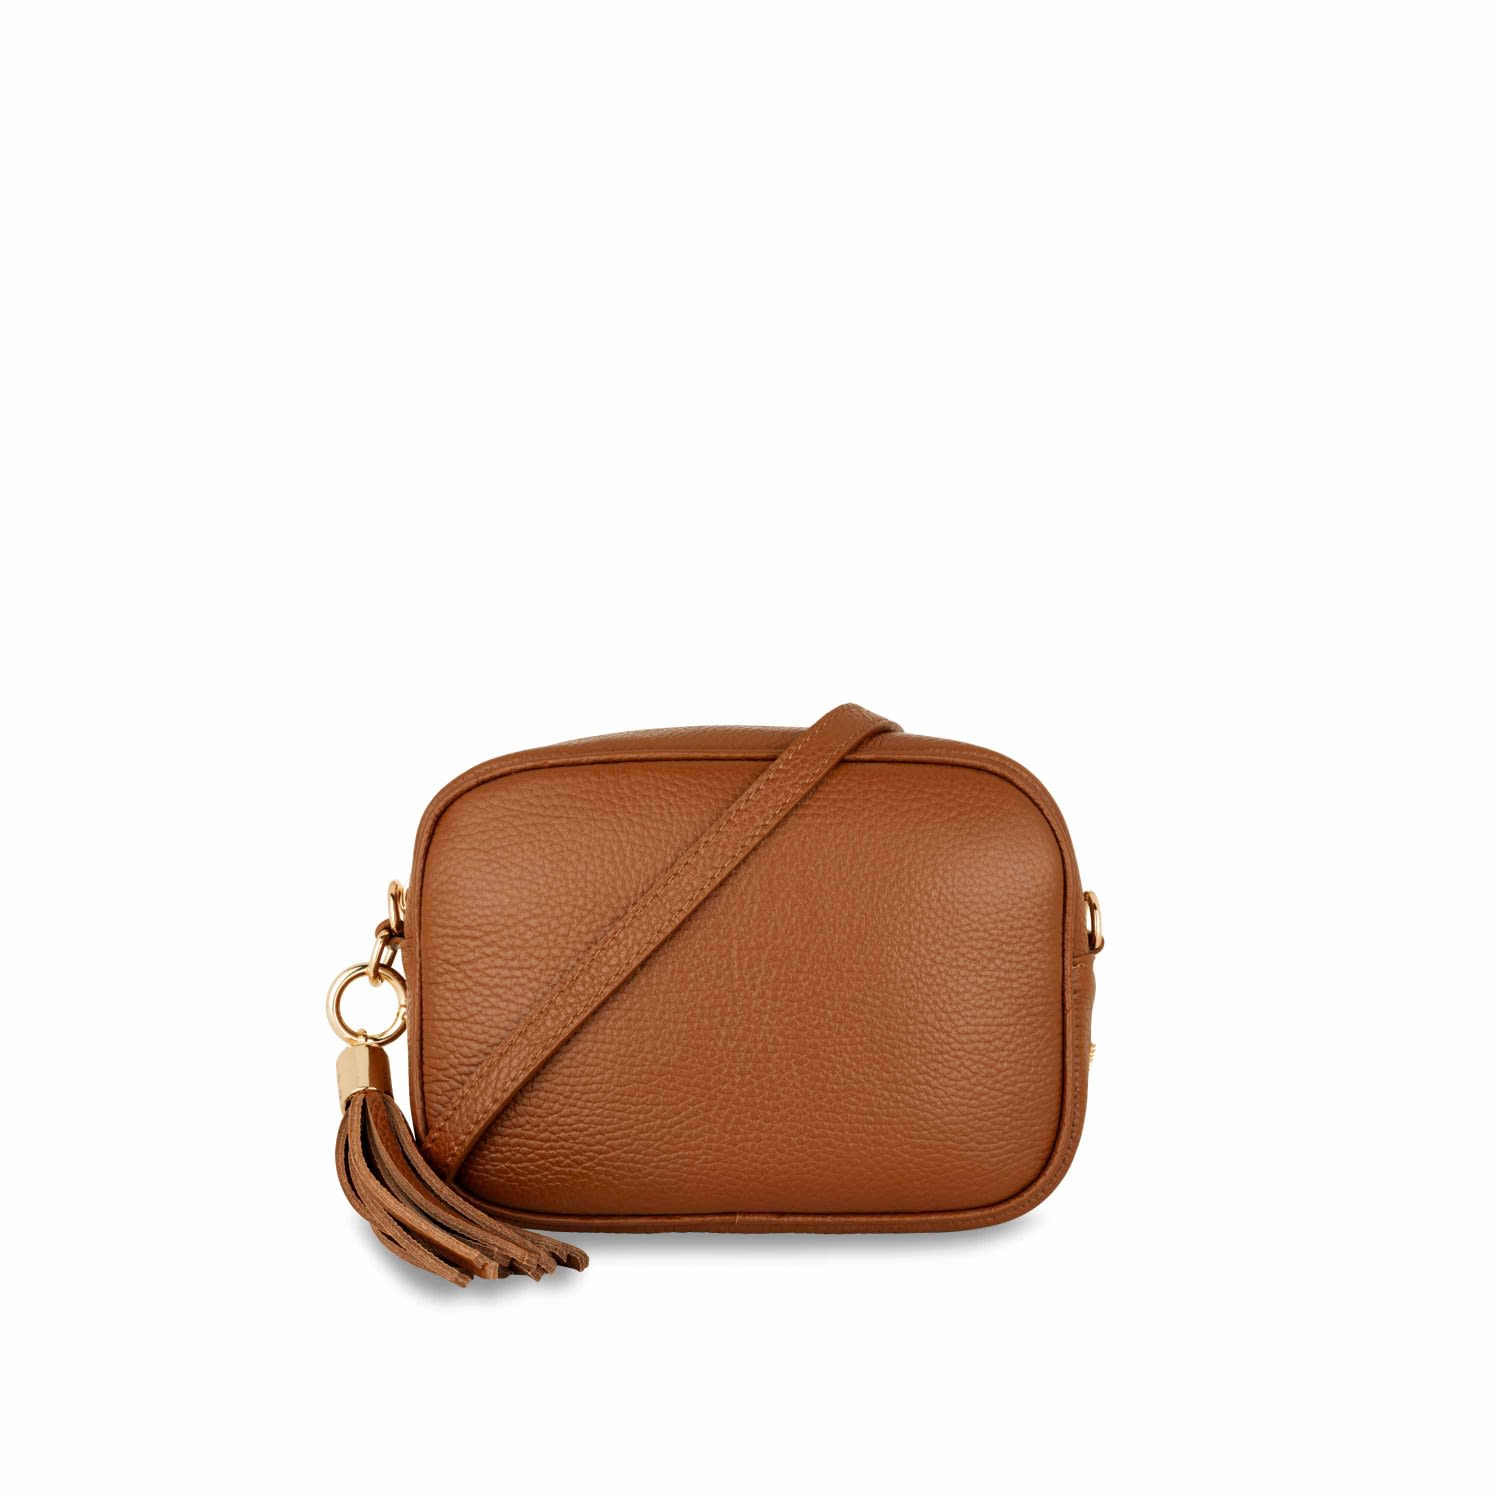 Apatchy London Women's Brown The Tassel Tan Leather Crossbody Bag